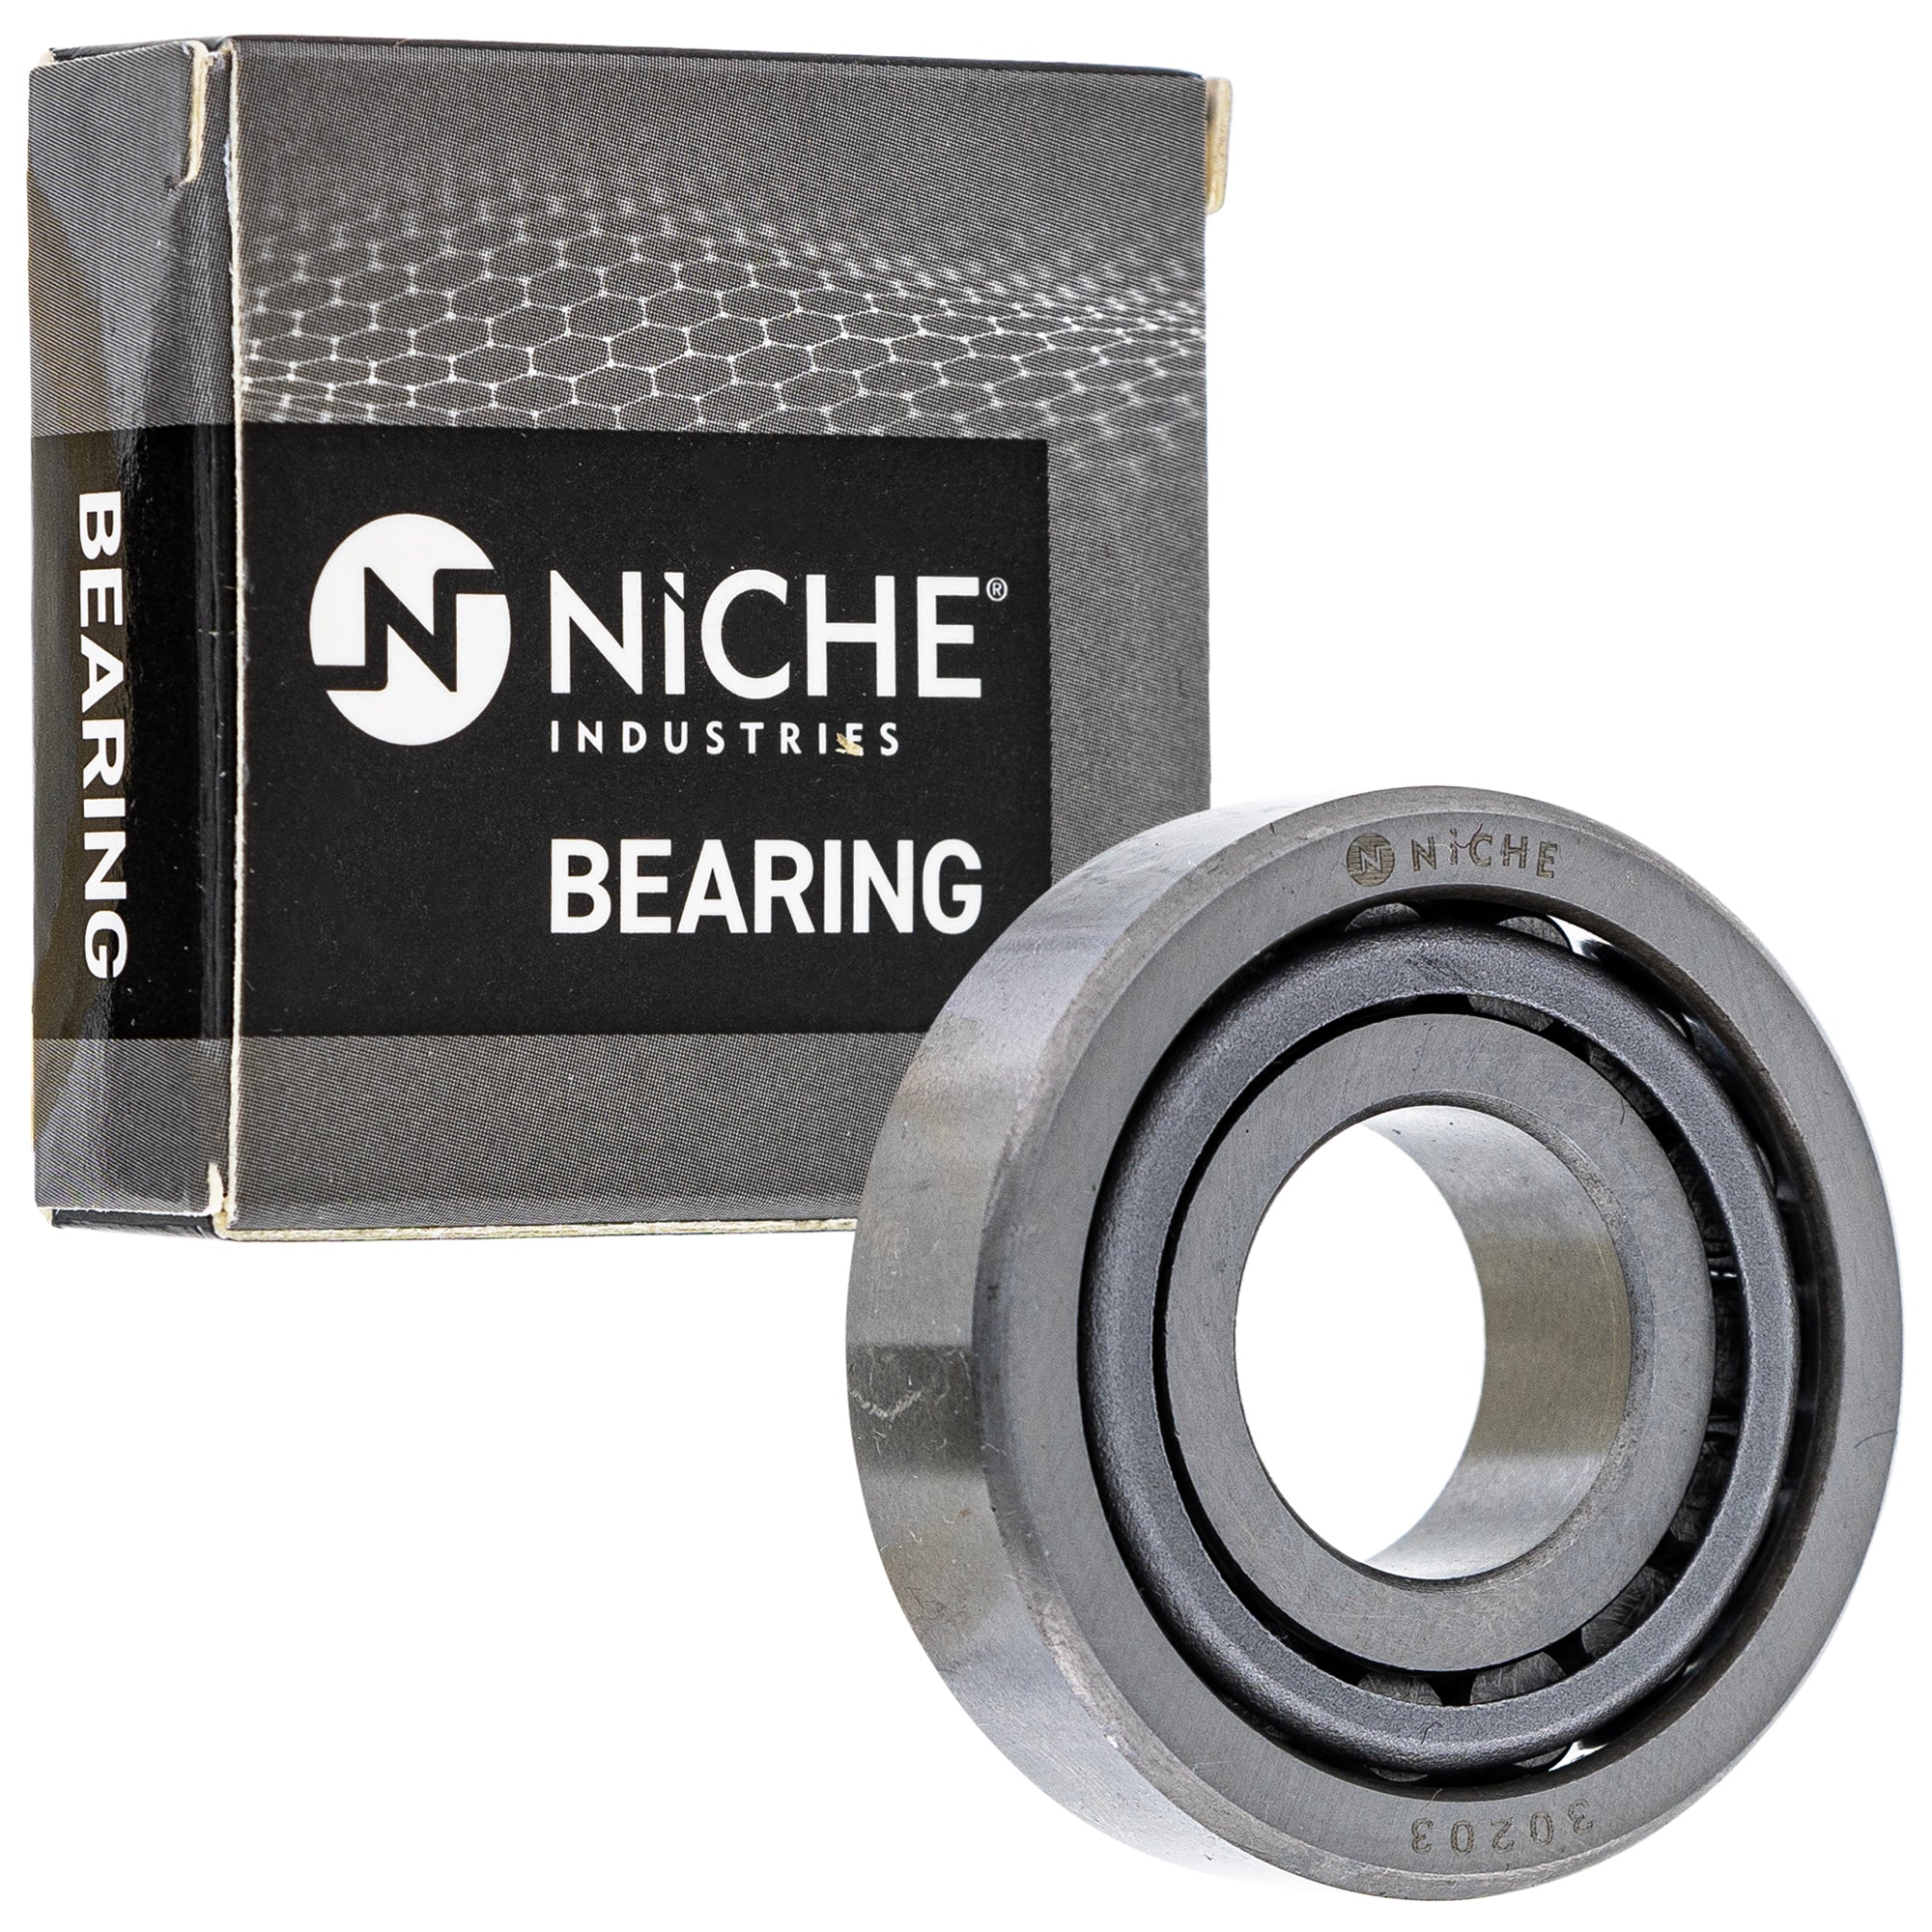 NICHE 519-CBB2323R Bearing 2-Pack for zOTHER R90S R80ST R80RT R80GS